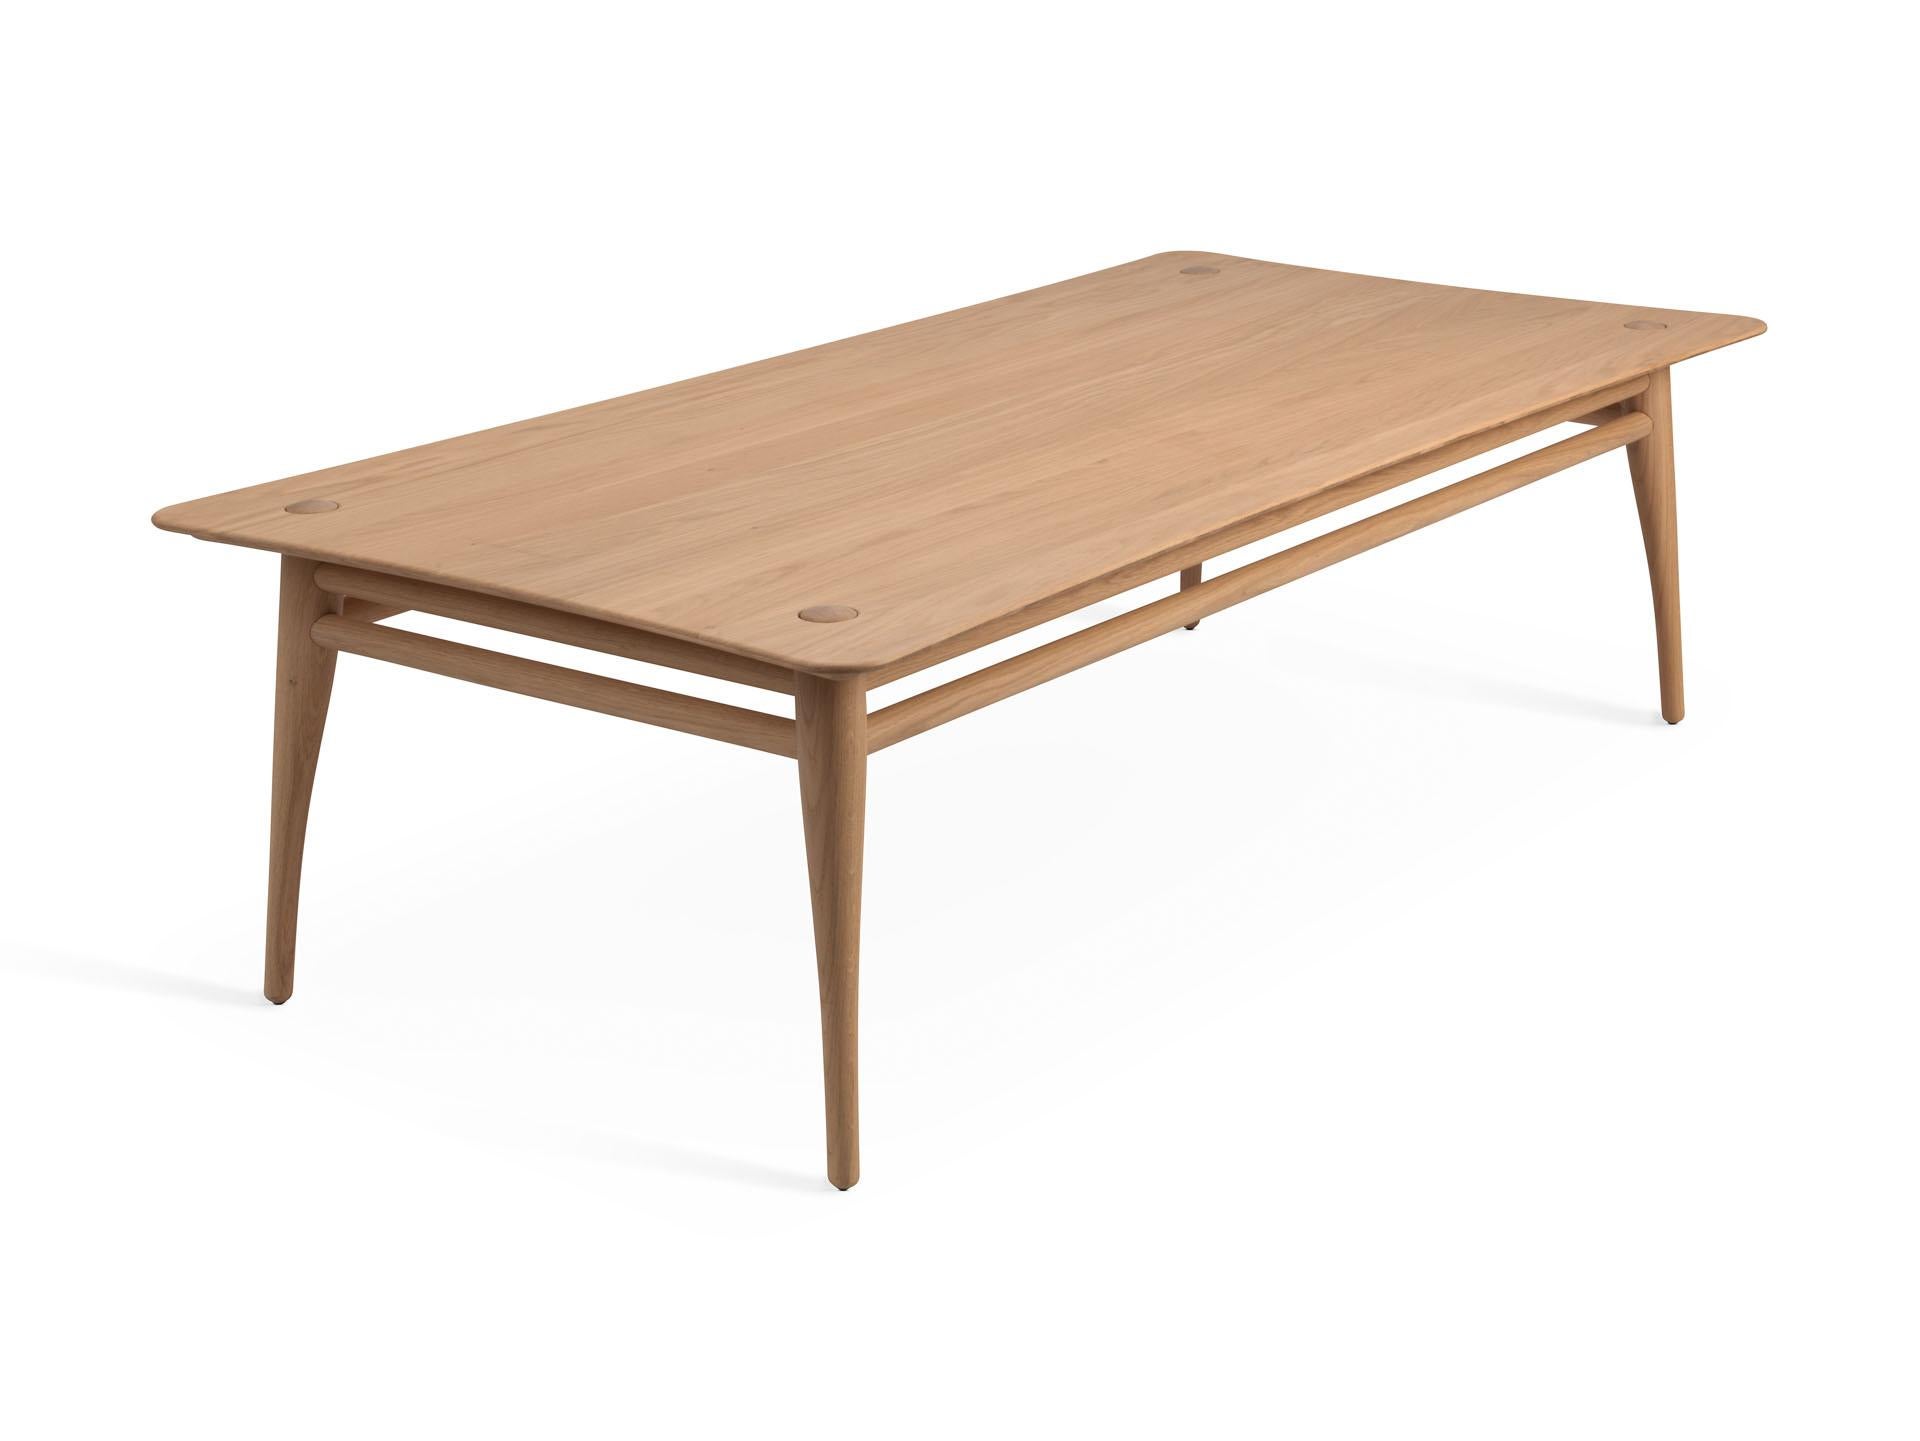 Chilgrove is a series of coffee tables crafted from a solid wooden frame and top which are gently curved. The wooden frame underneath the surface has four organic shaped legs which protrude elegantly through the surface of the table. The Chilgrove